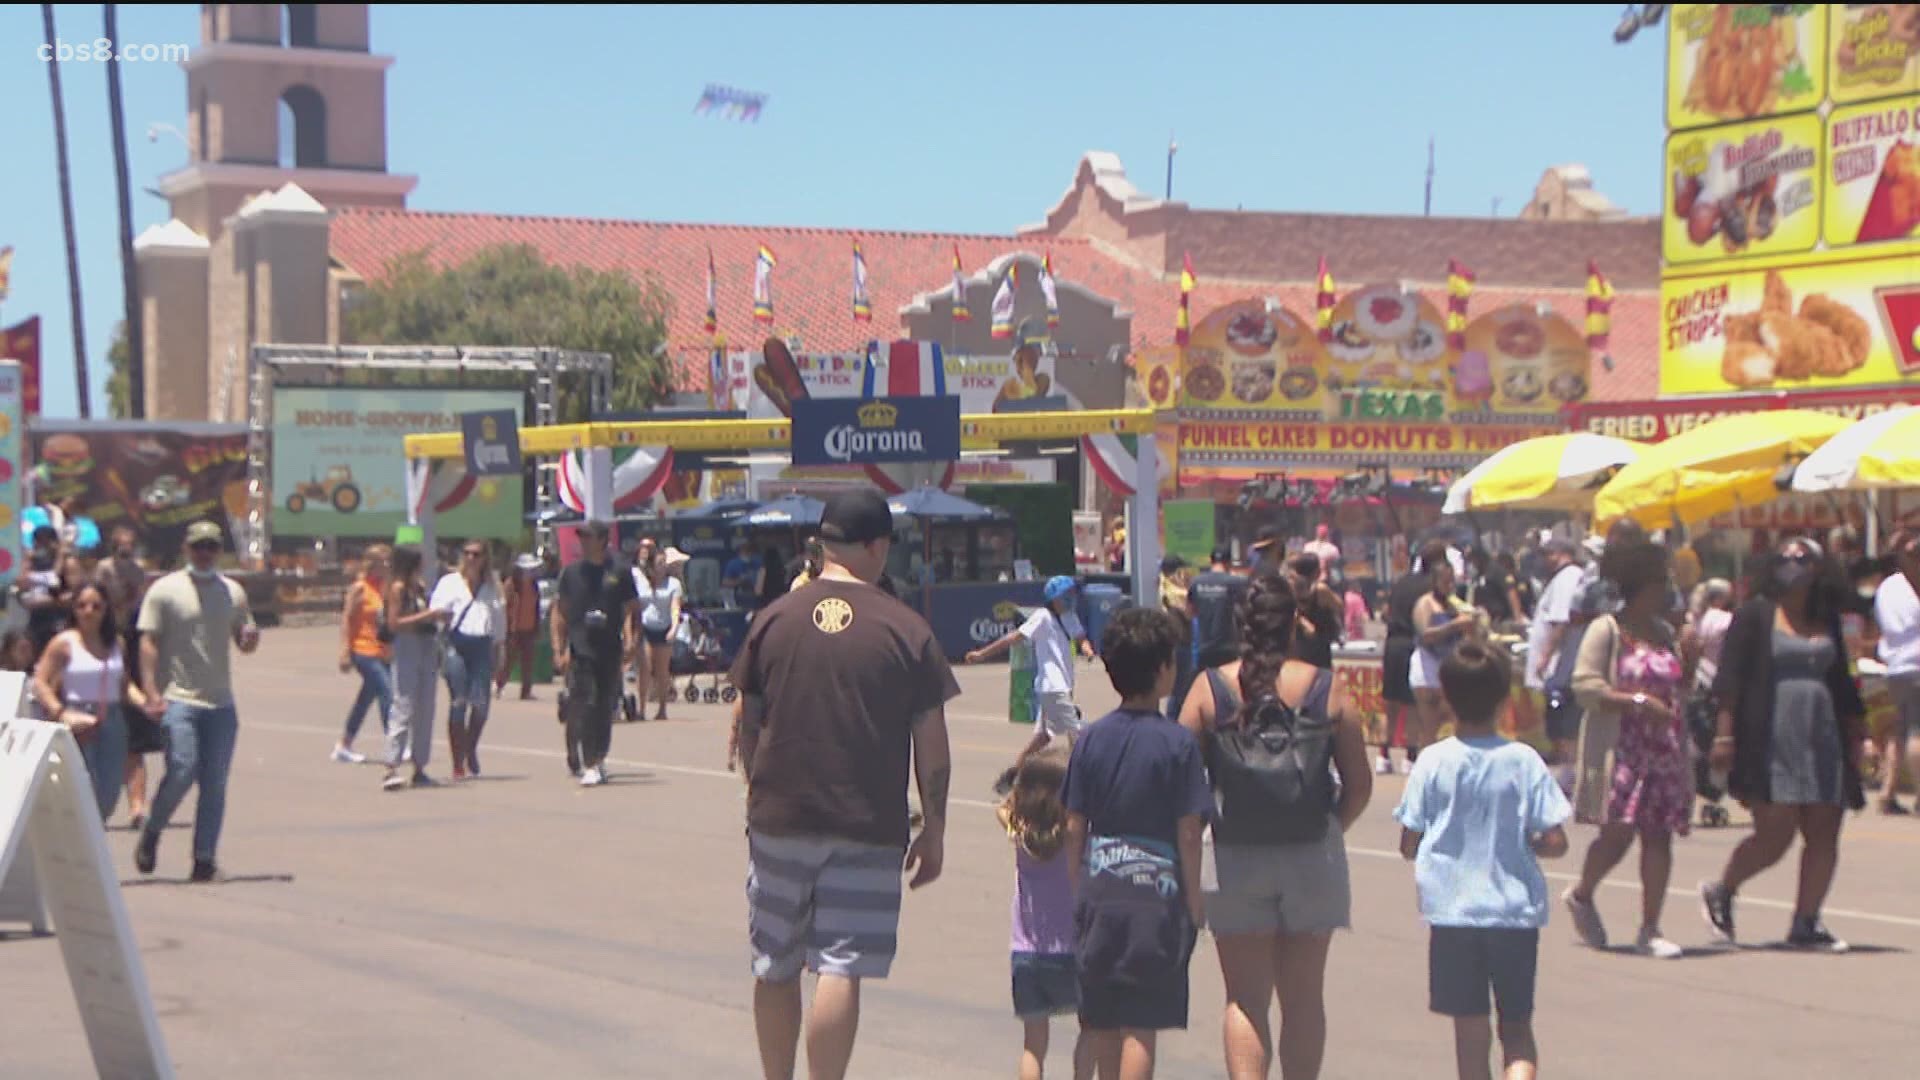 Organizers say they expect to see around 13,000 people come through their doors per day. During normal years the fair sees around 60,000 people per day.